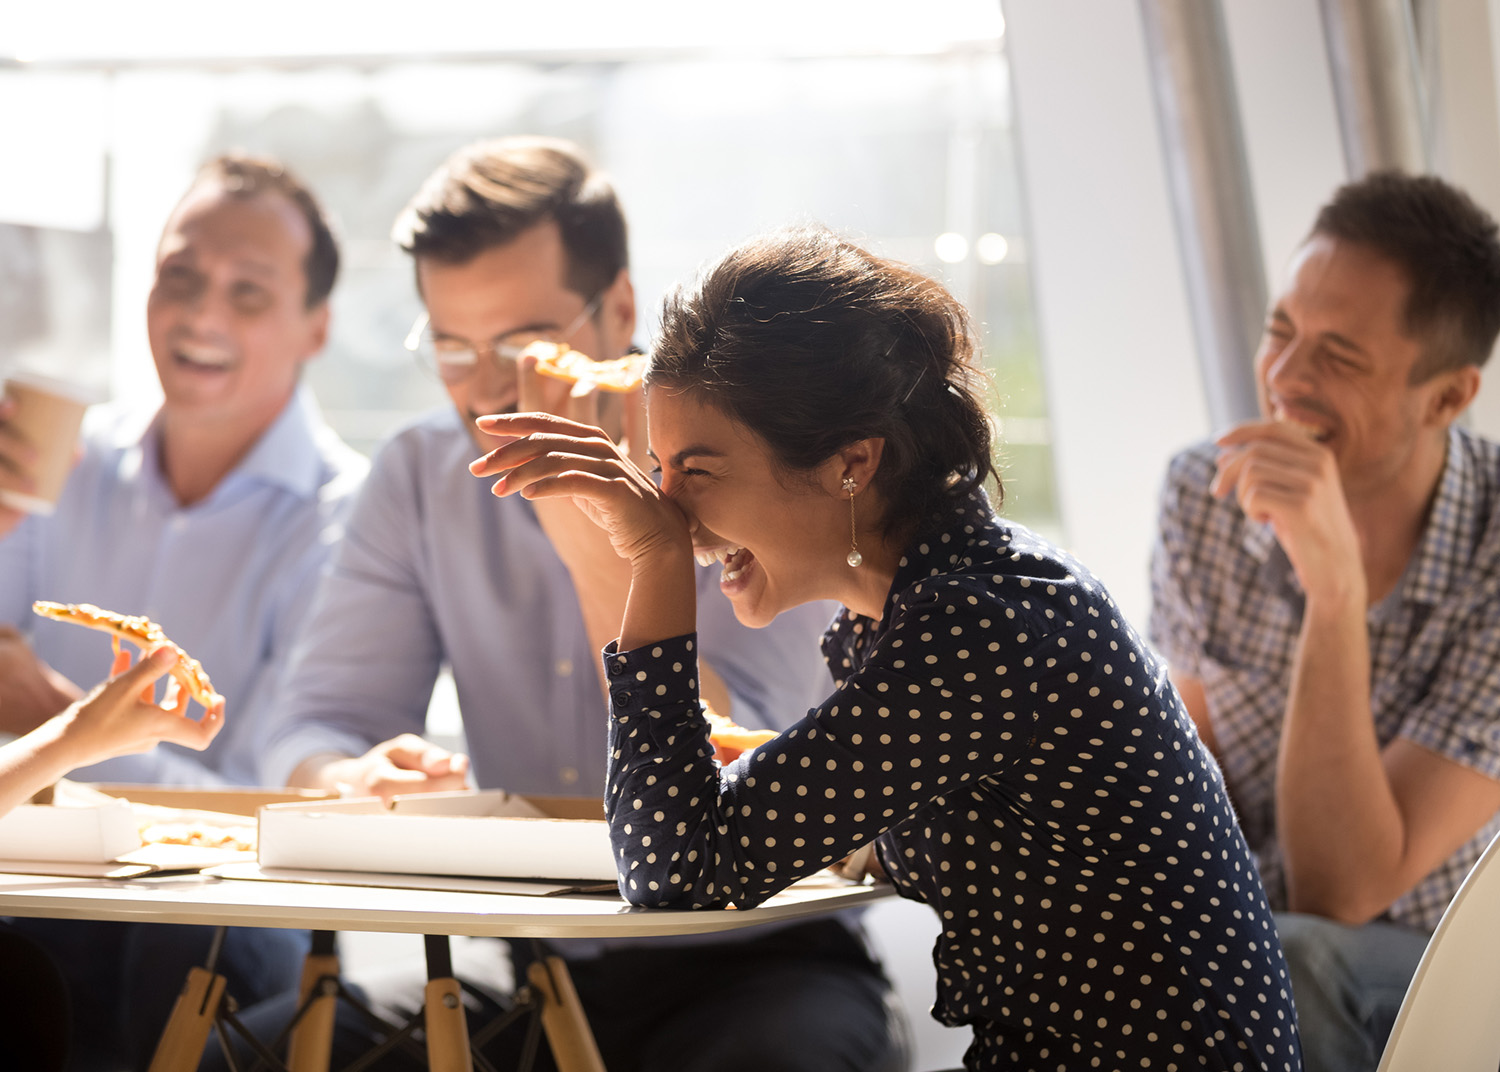 Indian woman laughing at funny joke eating pizza with diverse coworkers in office, friendly work team enjoying positive emotions and lunch together, happy colleagues staff group having fun at break